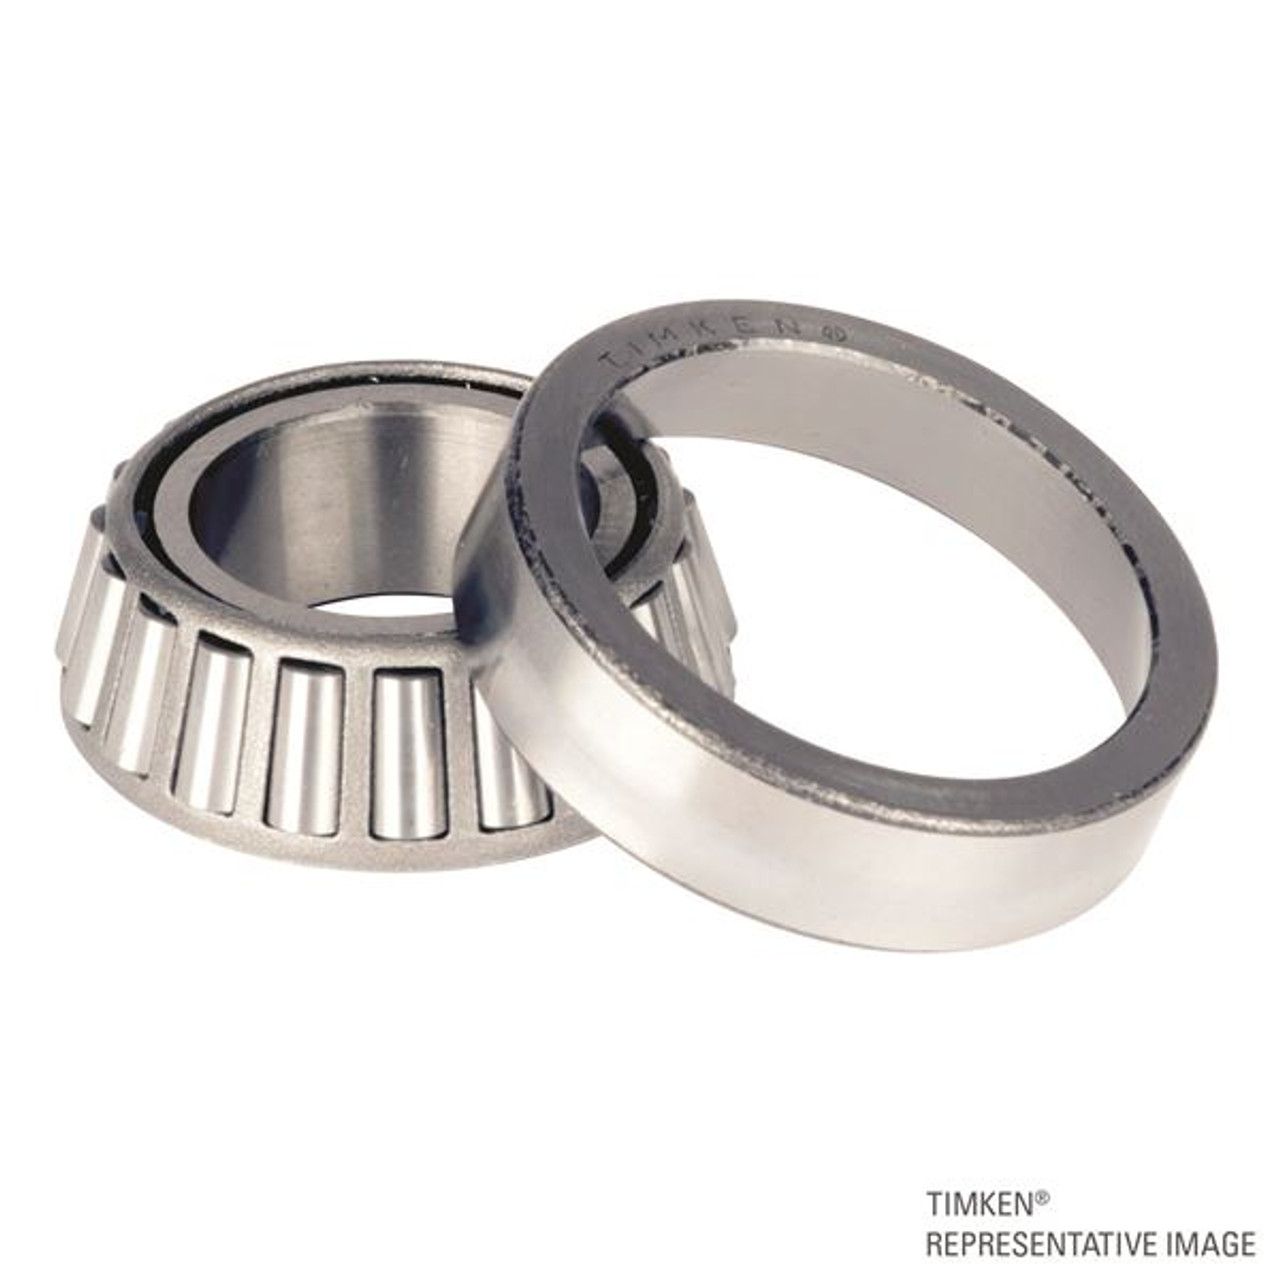 Timken® Single Row Cup & Cone Assembly - Precision Class  NA22171-90017